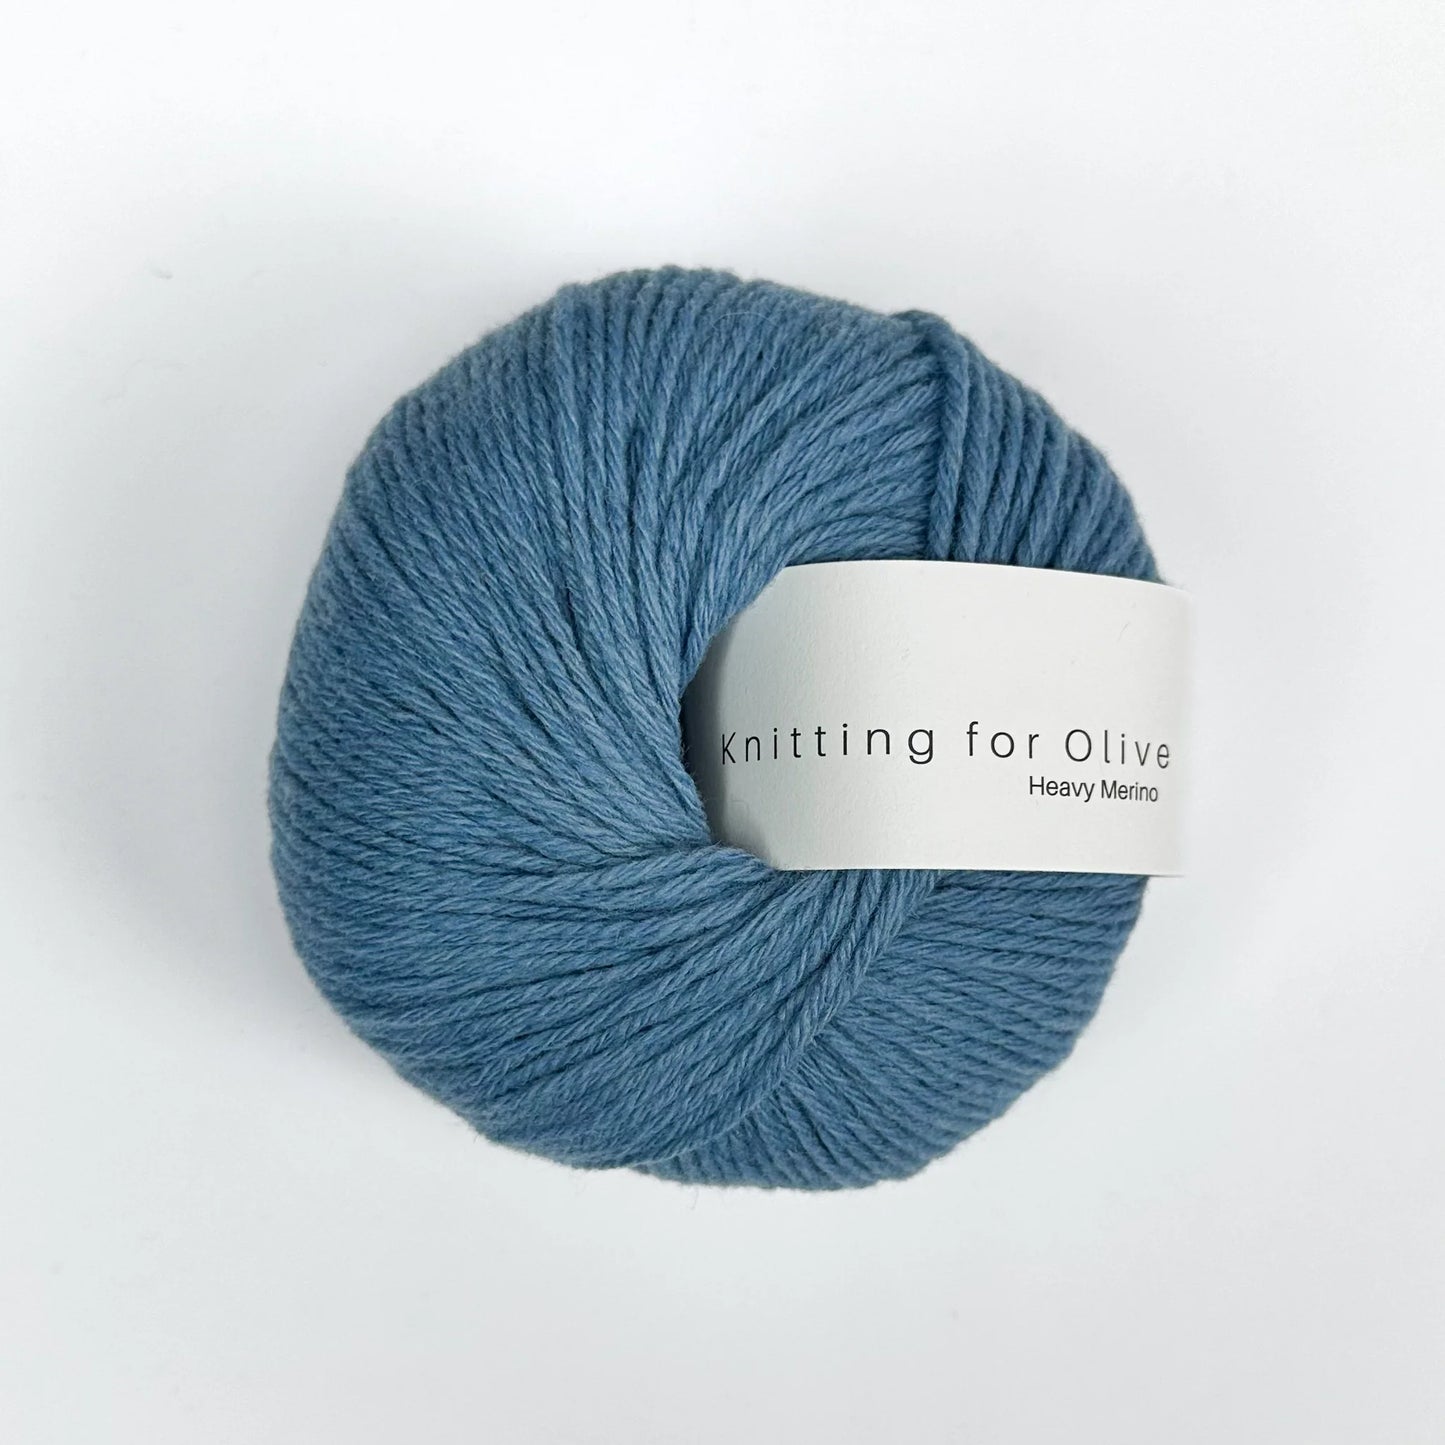 Knitting for Olive Heavy Merino - Worsted Weight 50g